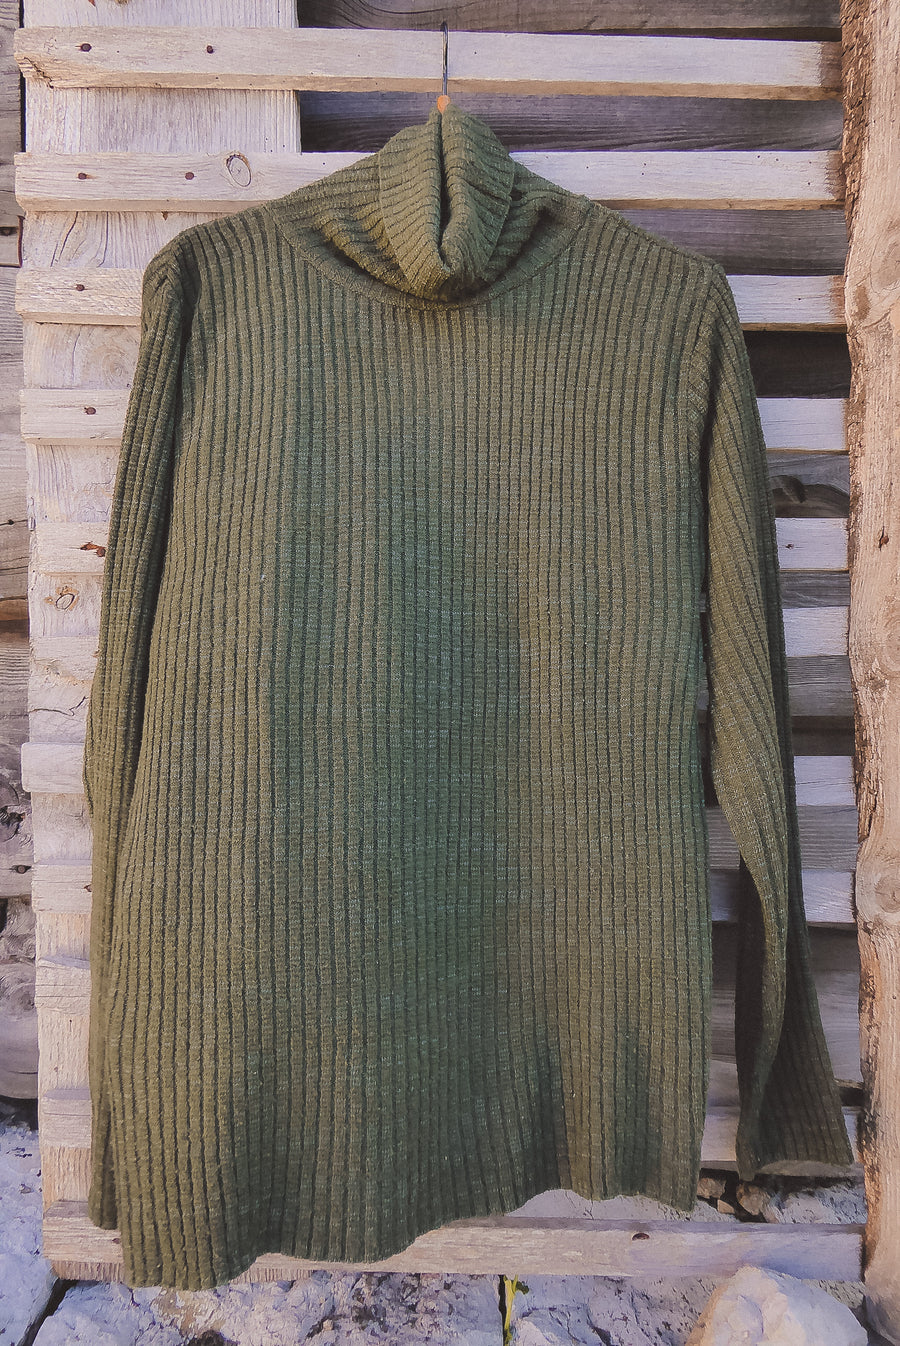 Knit ribbed turtleneck sweater